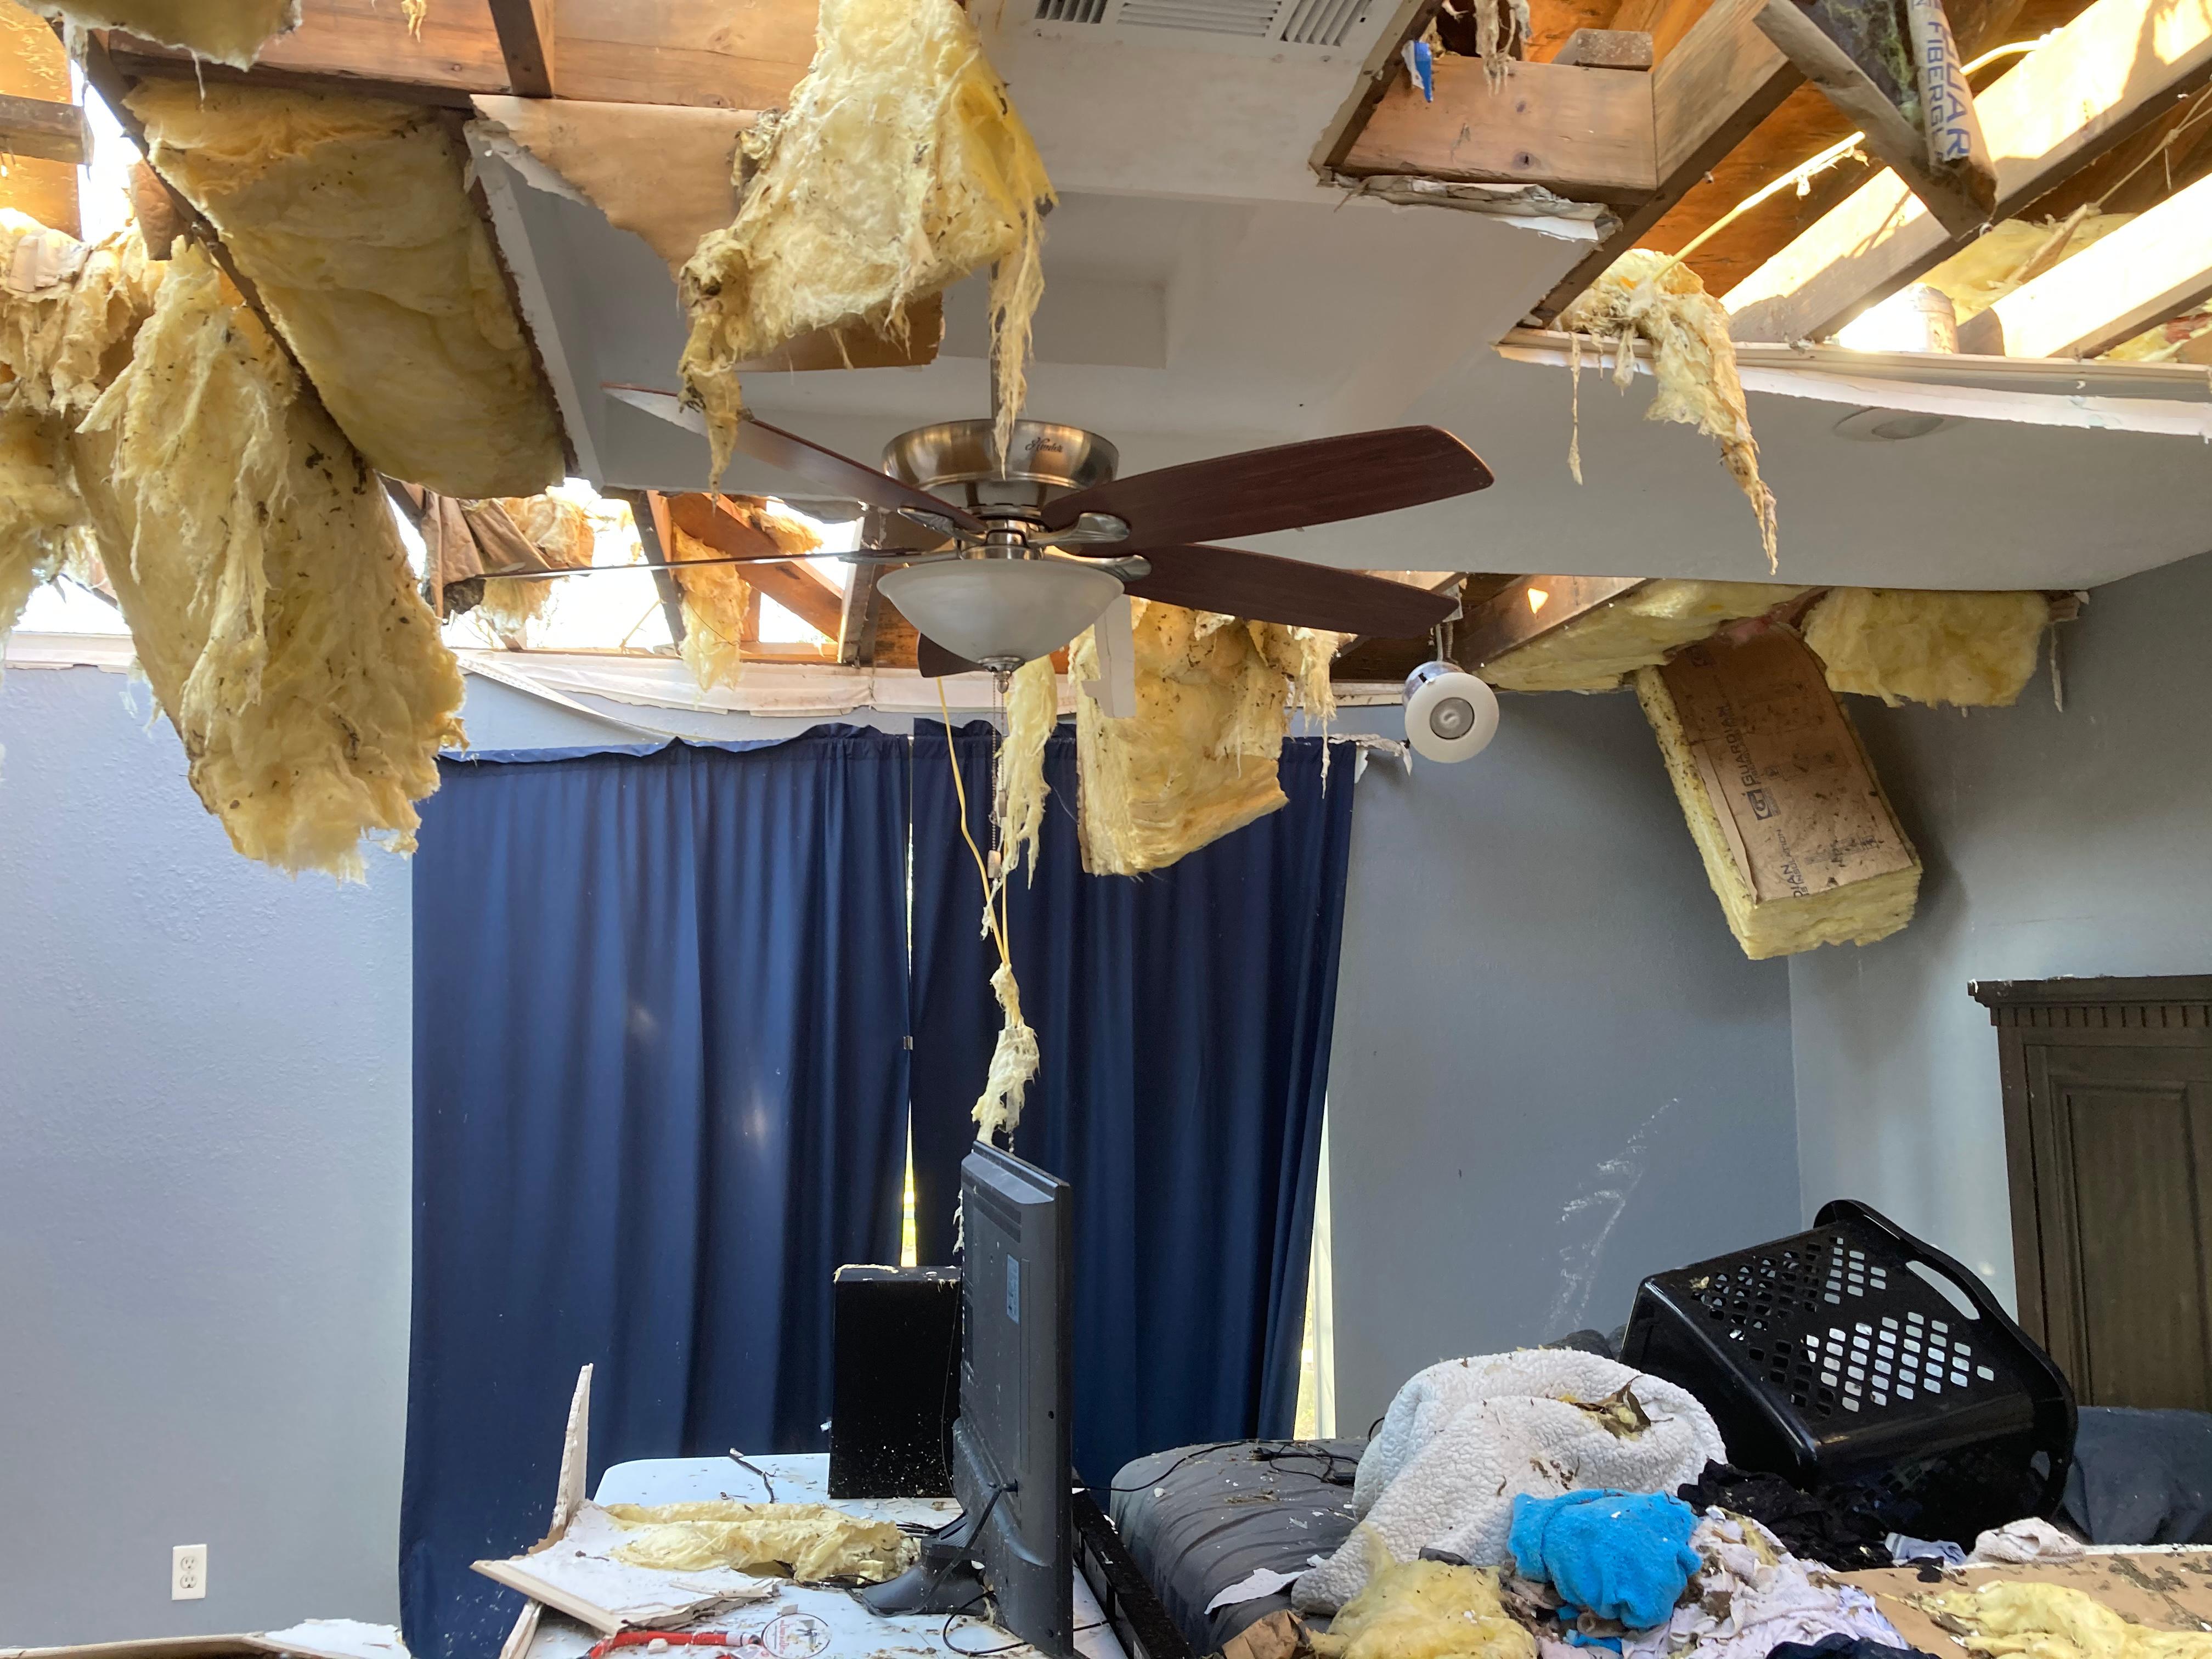 After a storm damages your home, our professionals are passionate about getting your property back "like it never even happened."